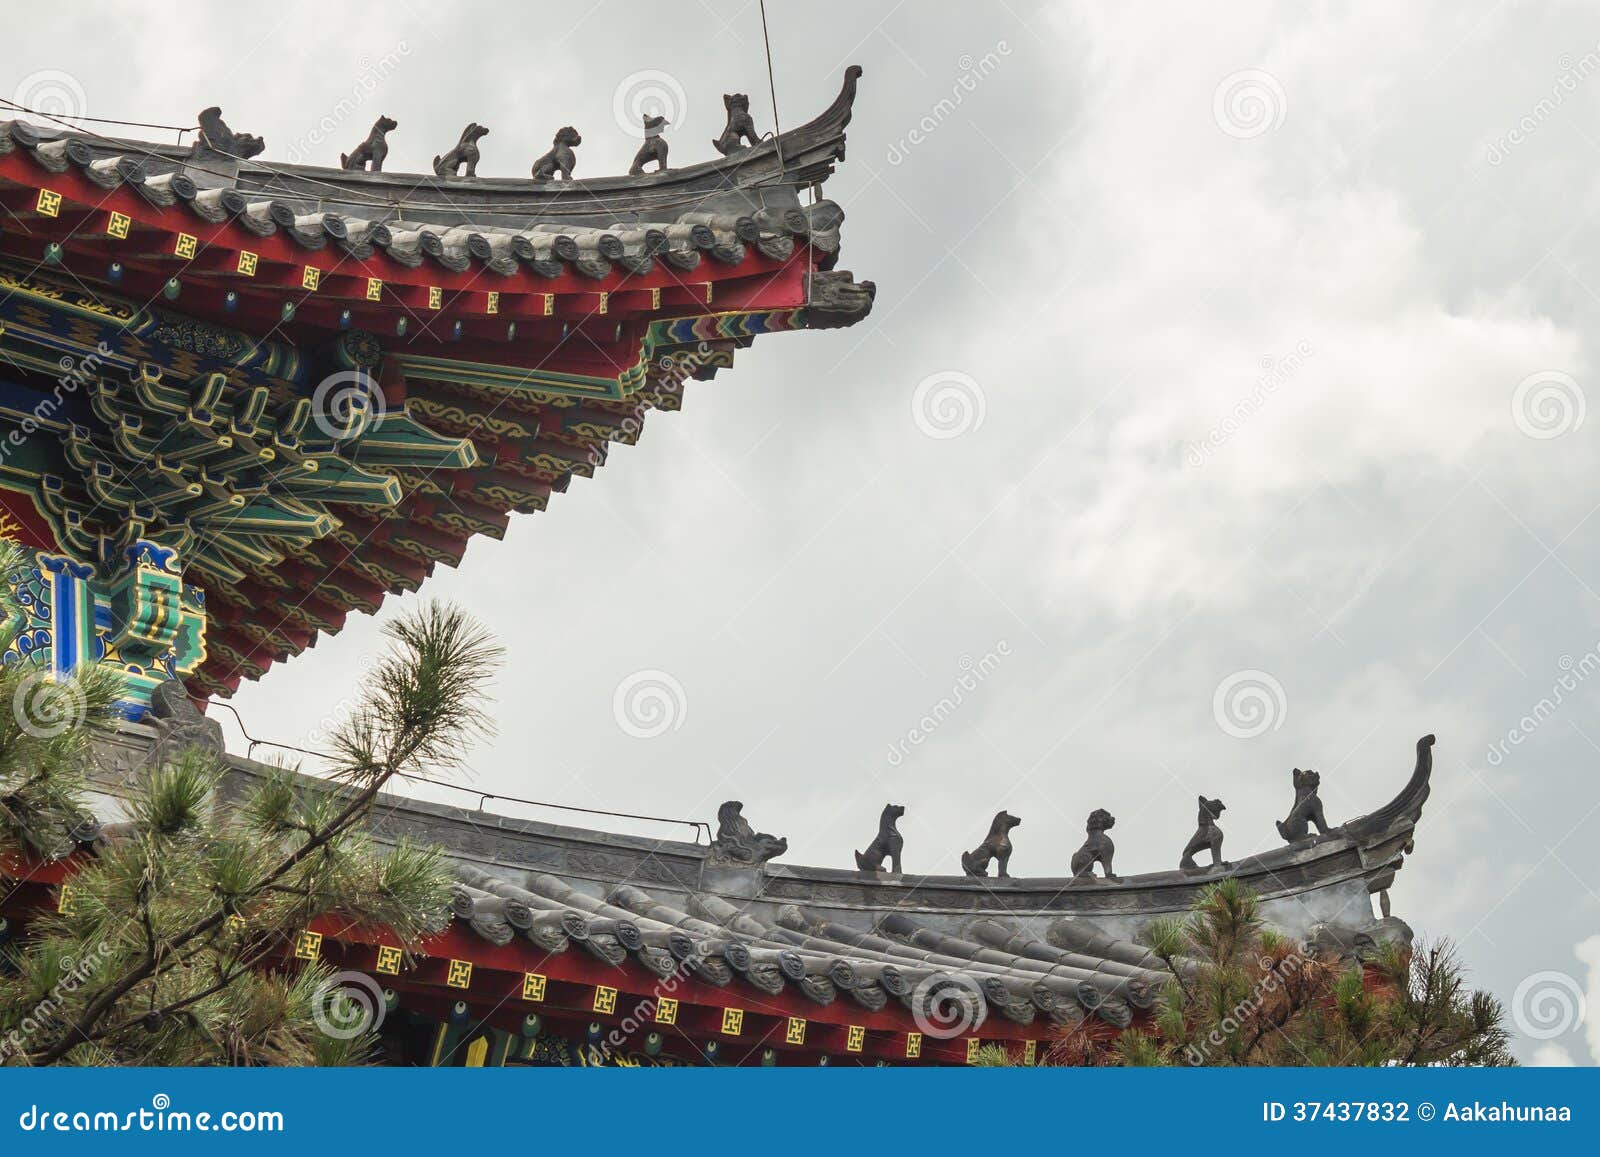 Chinese Classical Architecture Stock Photography - Image 